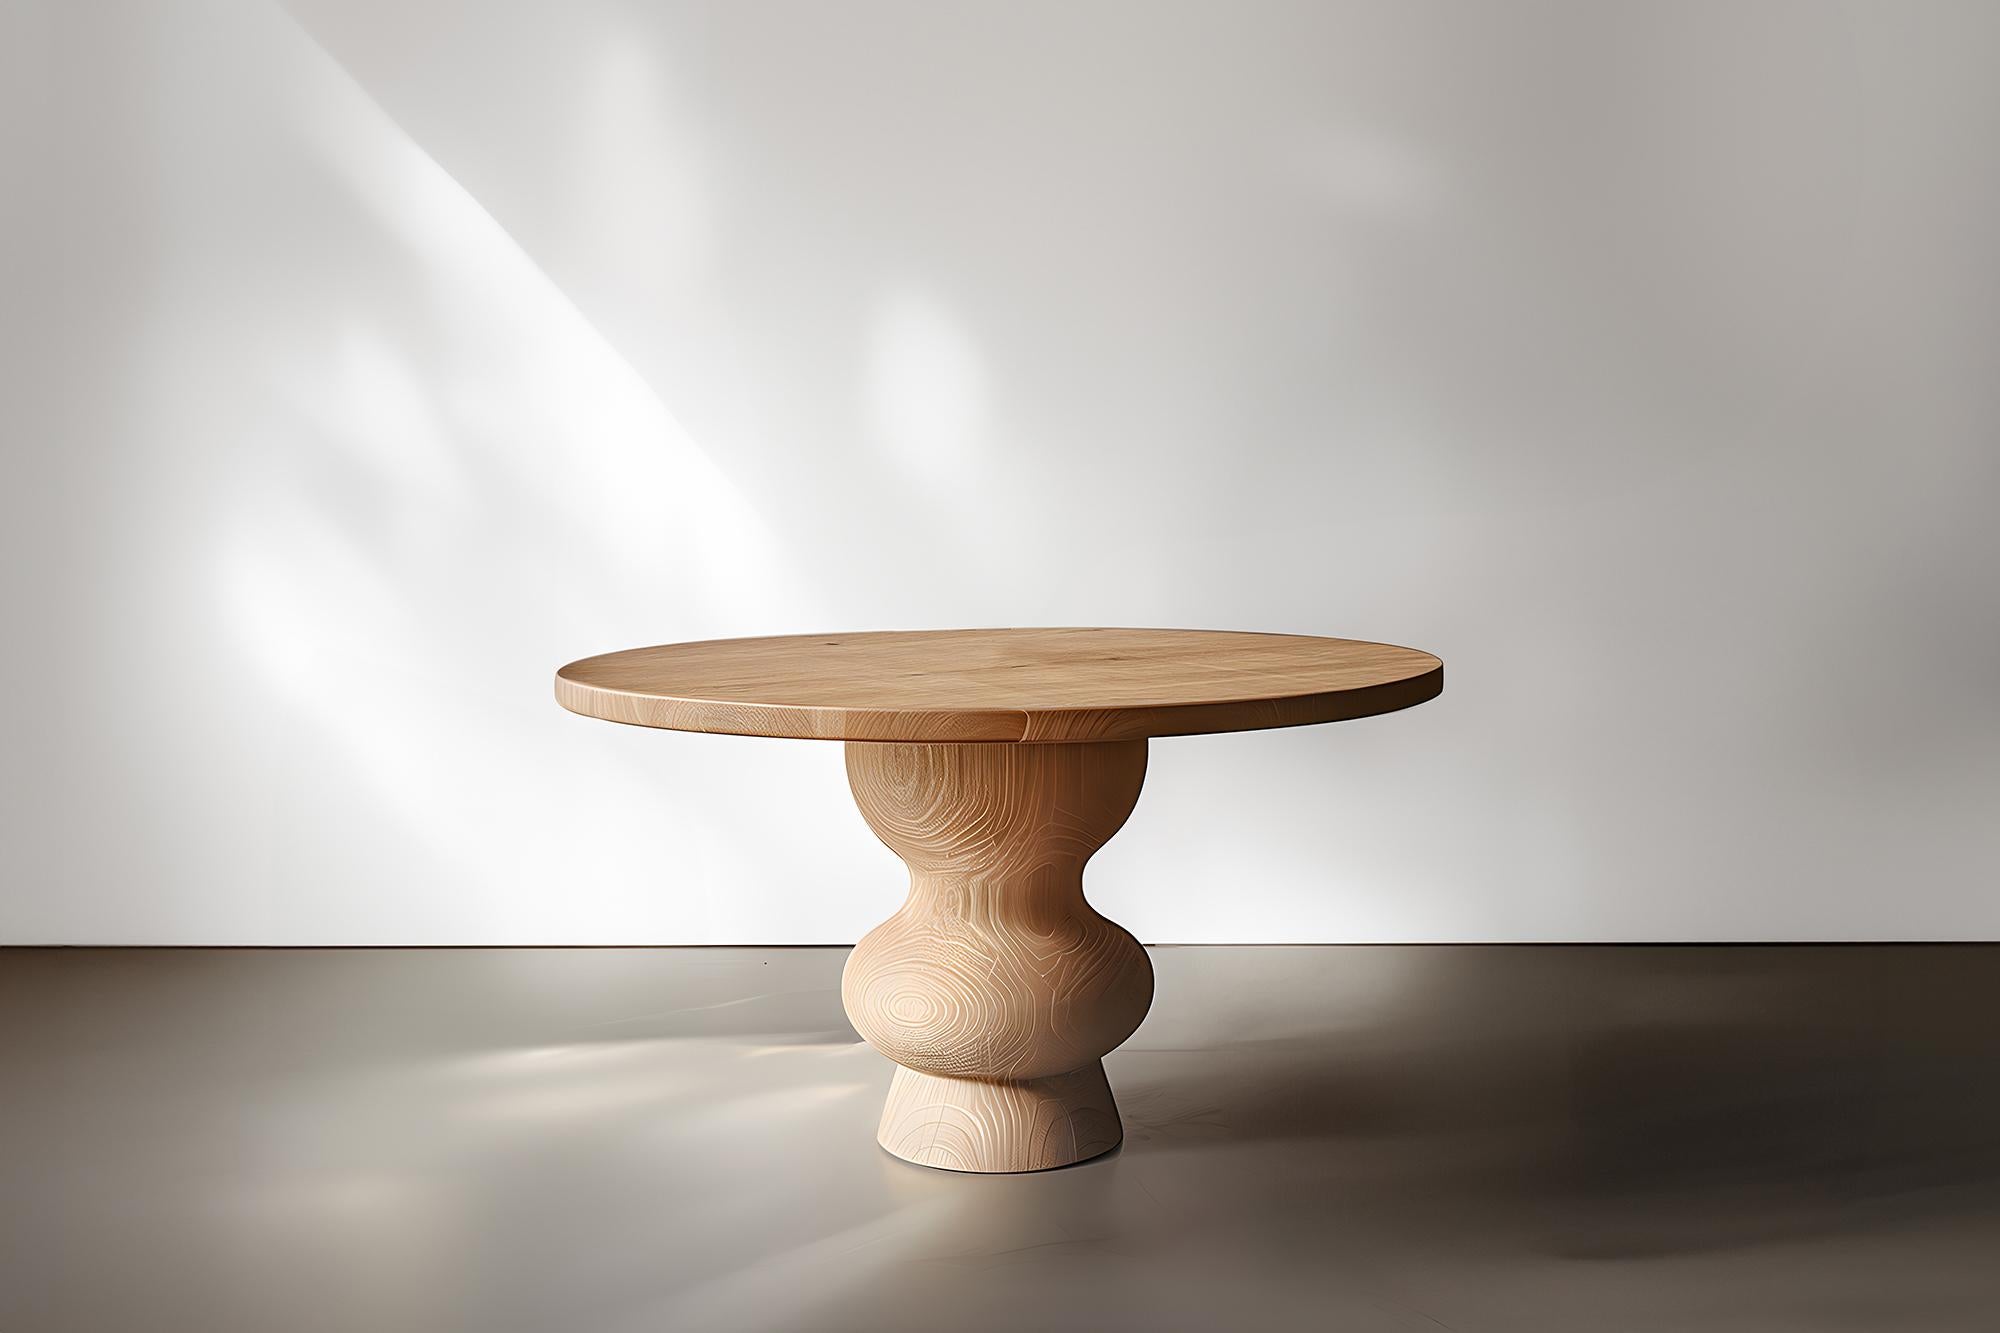 Serve in Style with Socle Serving Tables, NONO's Solid Wood No13

——

Introducing the 